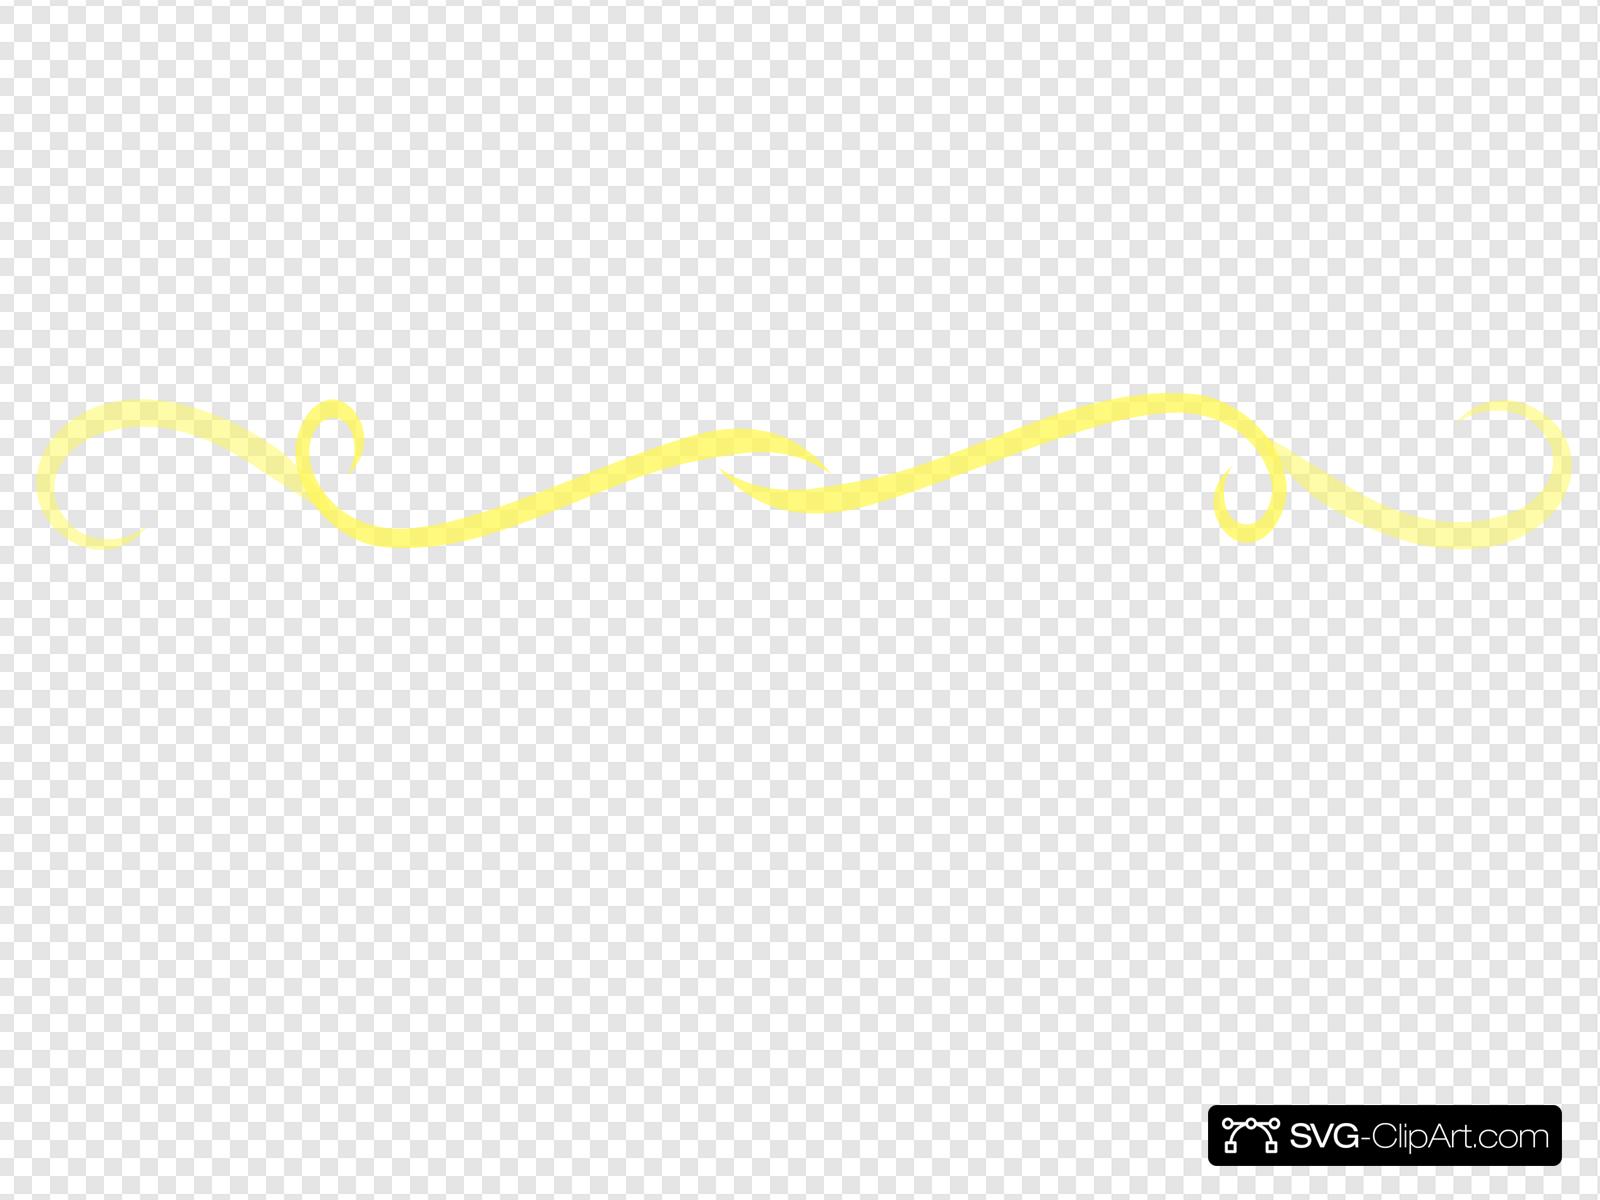 divider clipart yellow